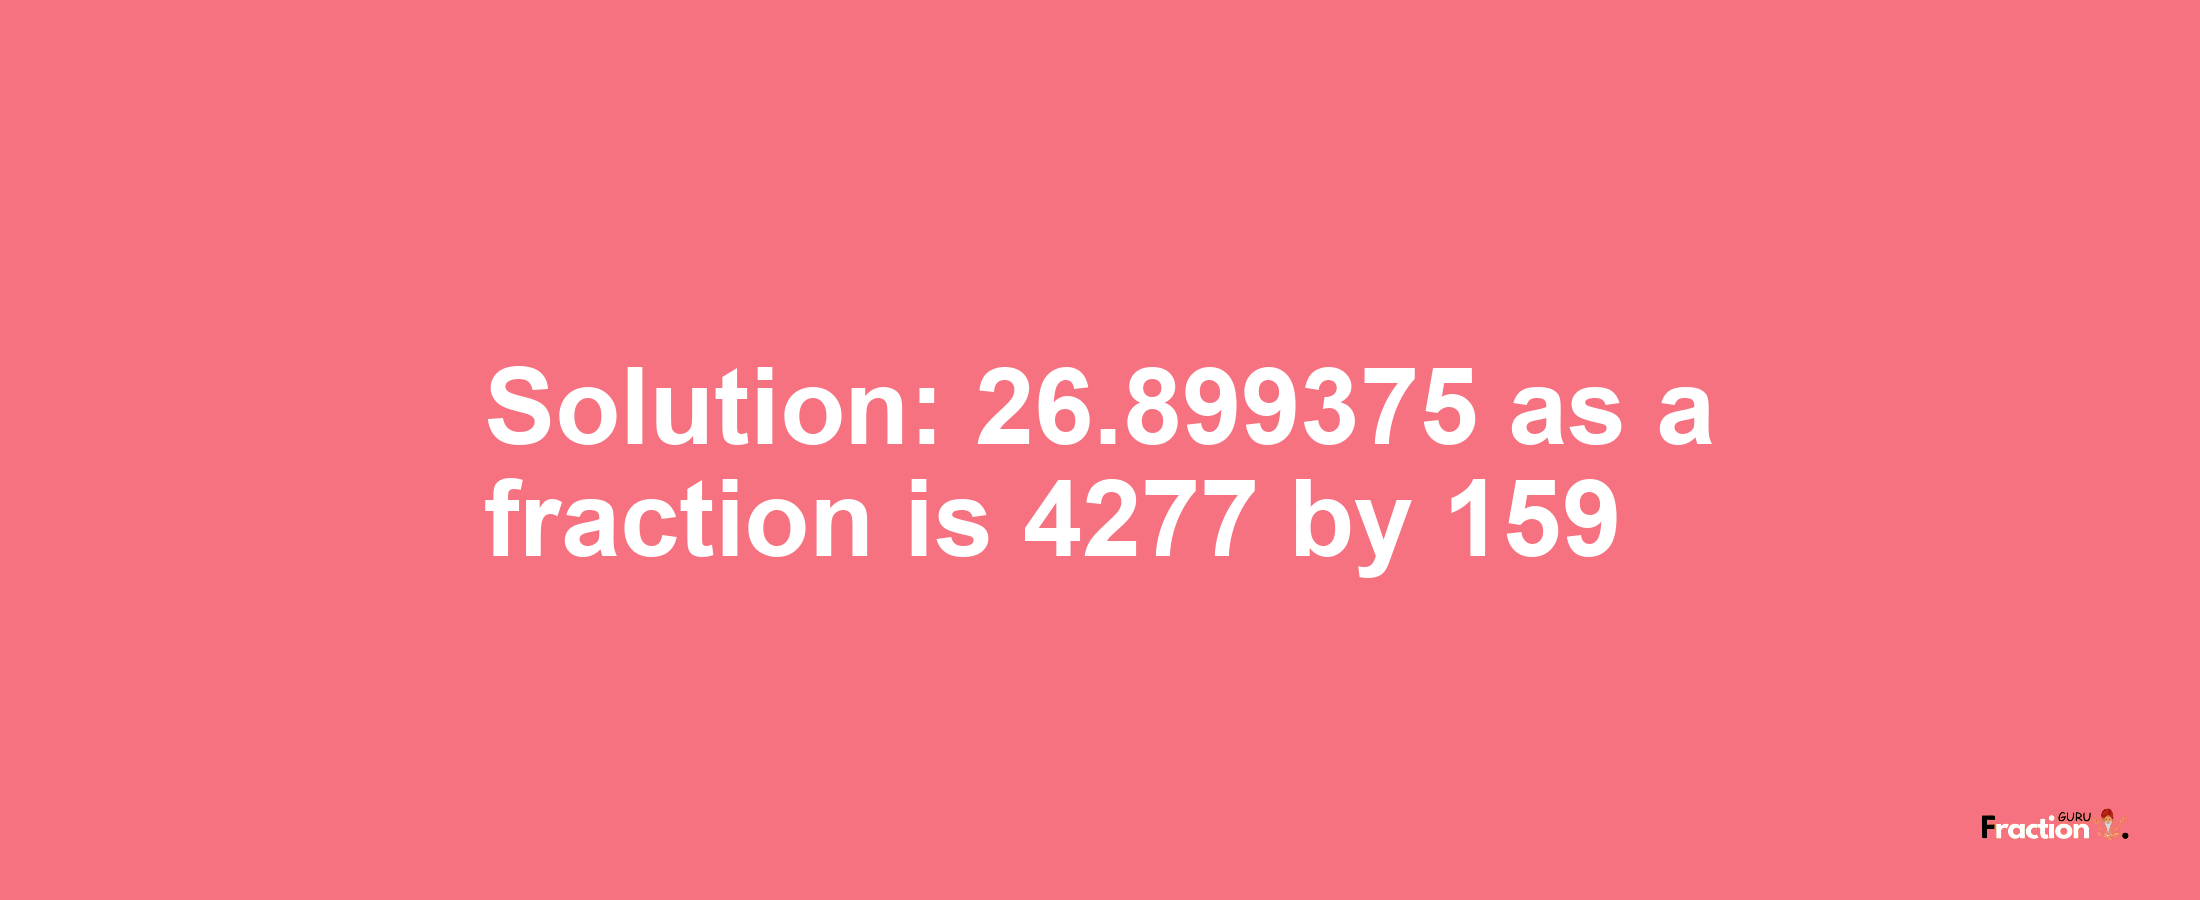 Solution:26.899375 as a fraction is 4277/159